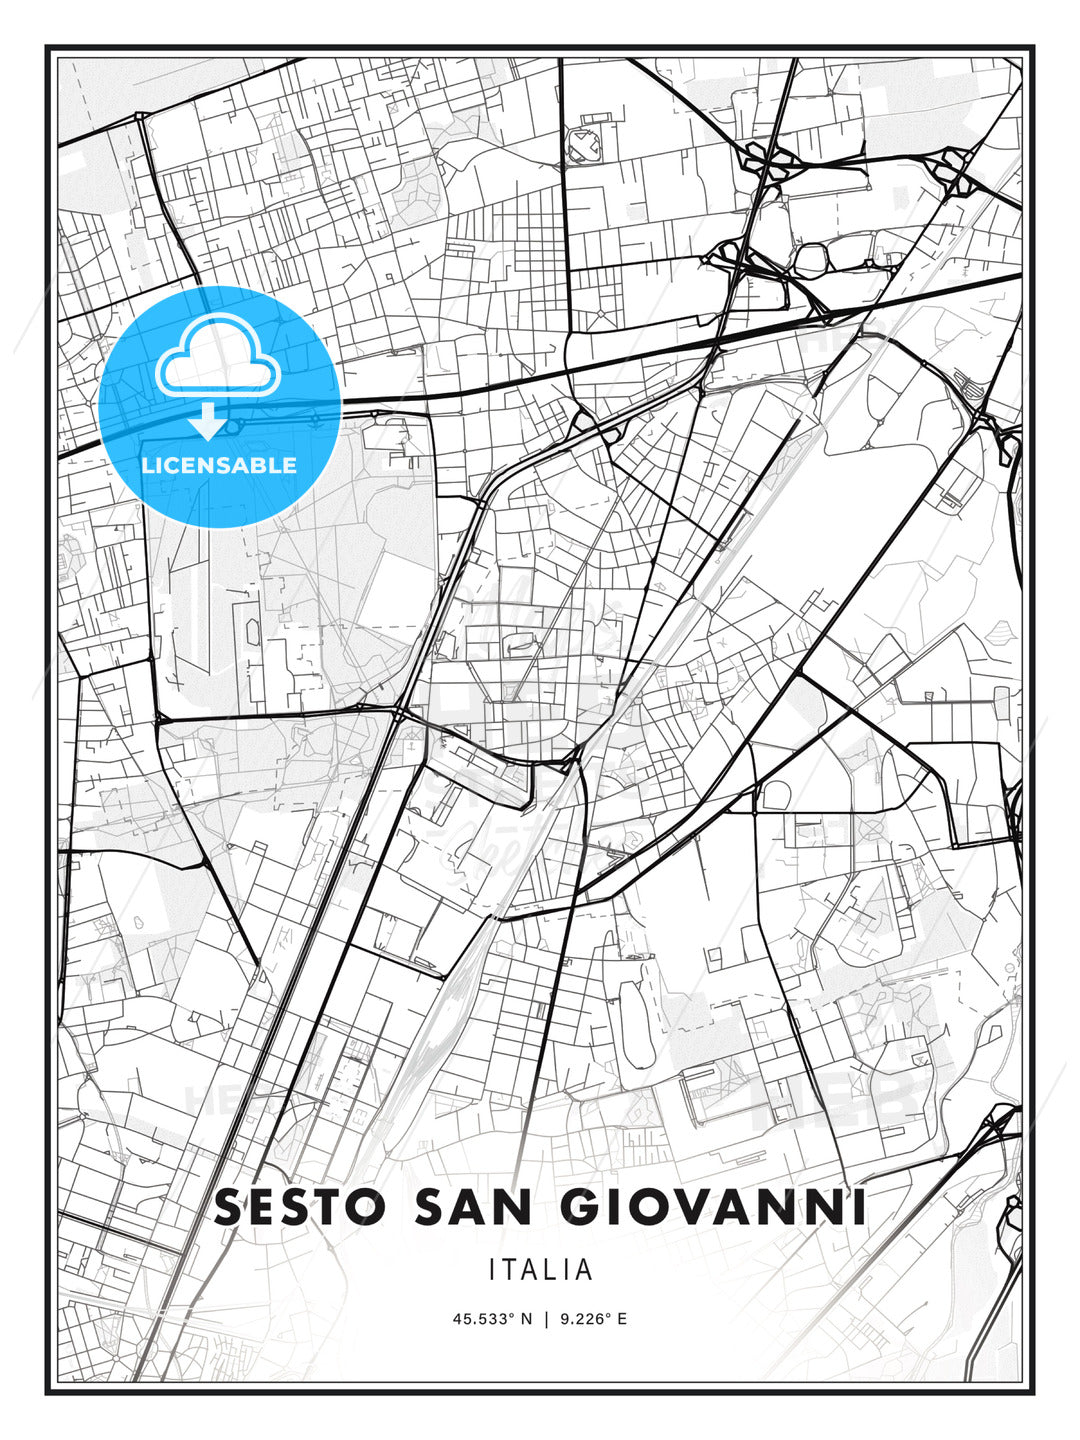 Sesto San Giovanni, Italy, Modern Print Template in Various Formats - HEBSTREITS Sketches